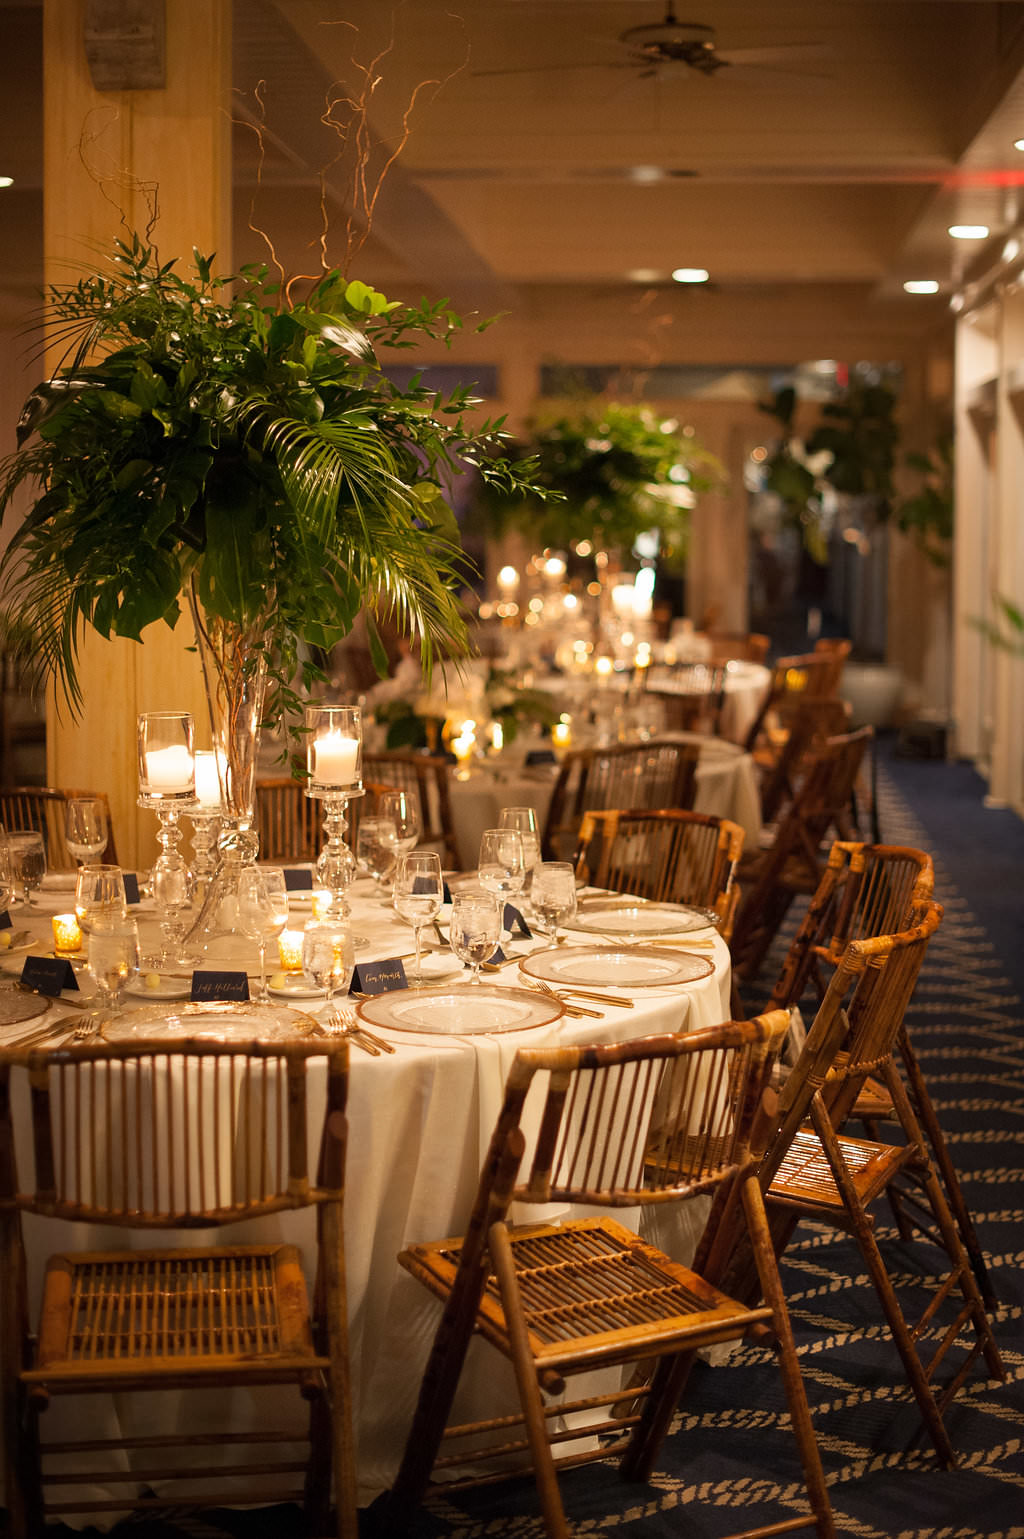 Indoor Wedding Reception Decor, Tall Glass Cylinder Vase with Tropical Green Leaves and Wooden Brown Chairs | Tampa Wedding Planner Parties A La Carte | Clearwater Beach Wedding Venue Carlouel Yacht Club | St Pete Rentals Over The Top Linen Rentals and A Chair Affair